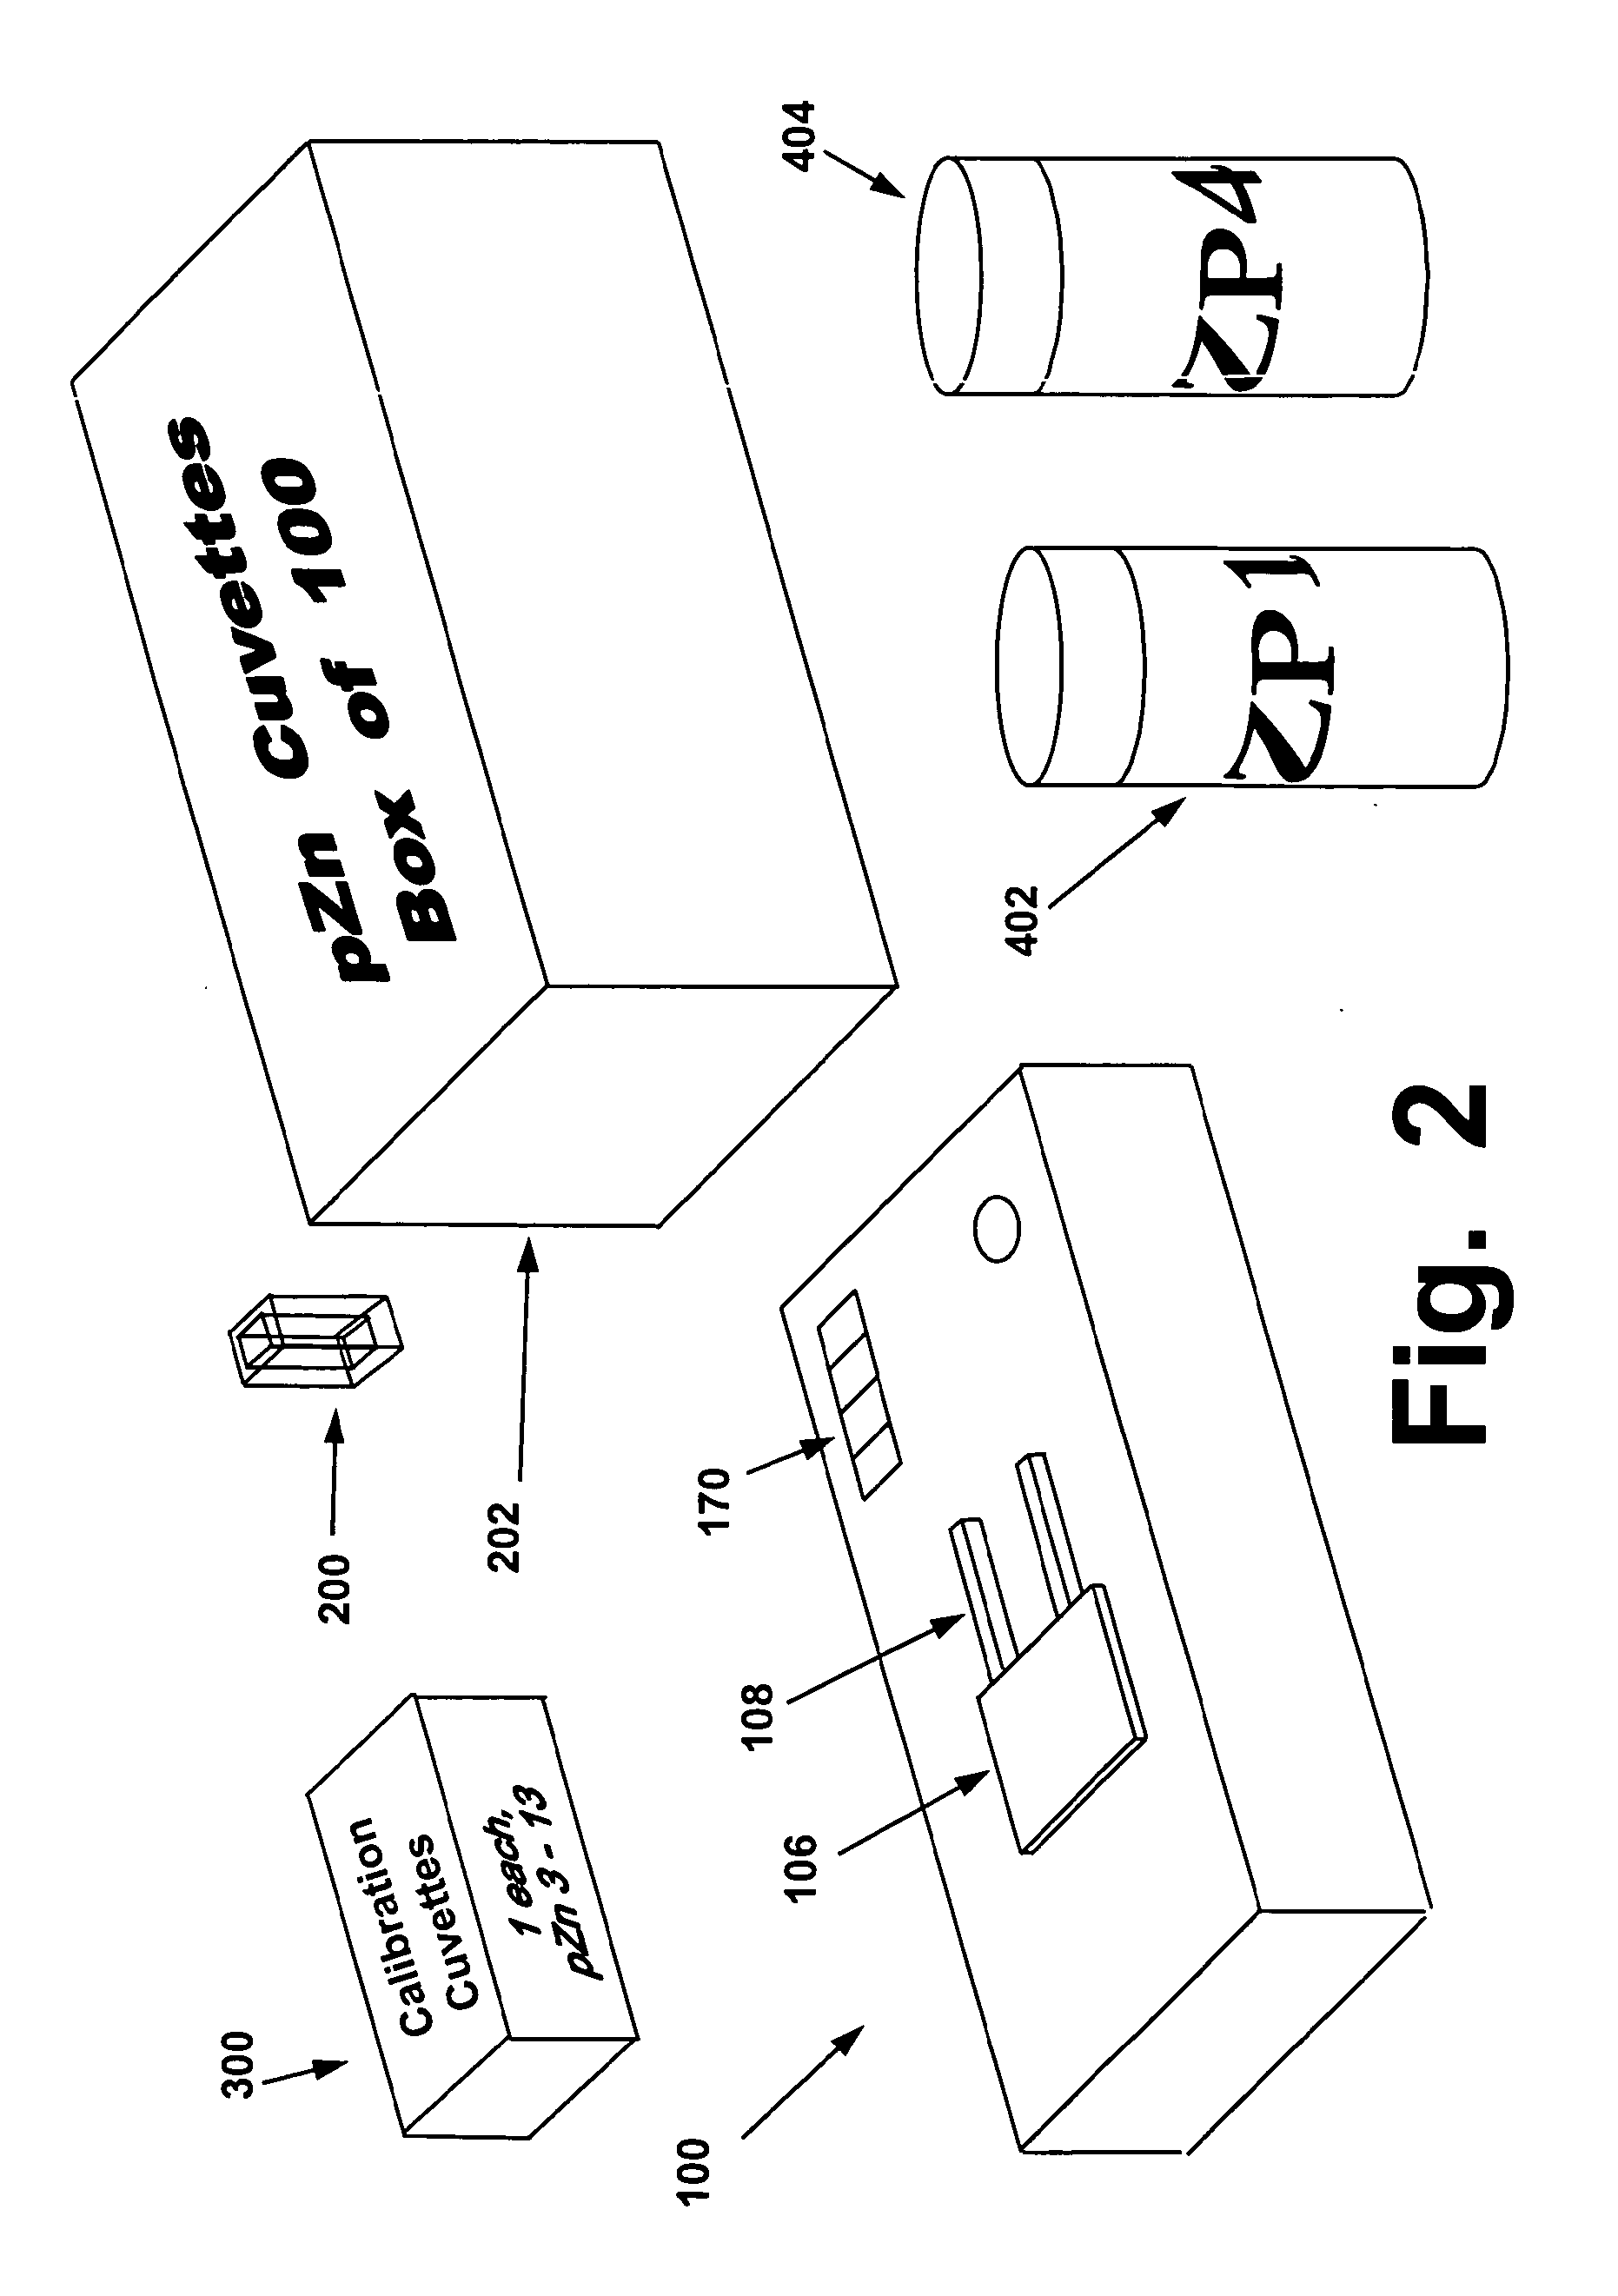 Apparatus and method for detecting zinc ions